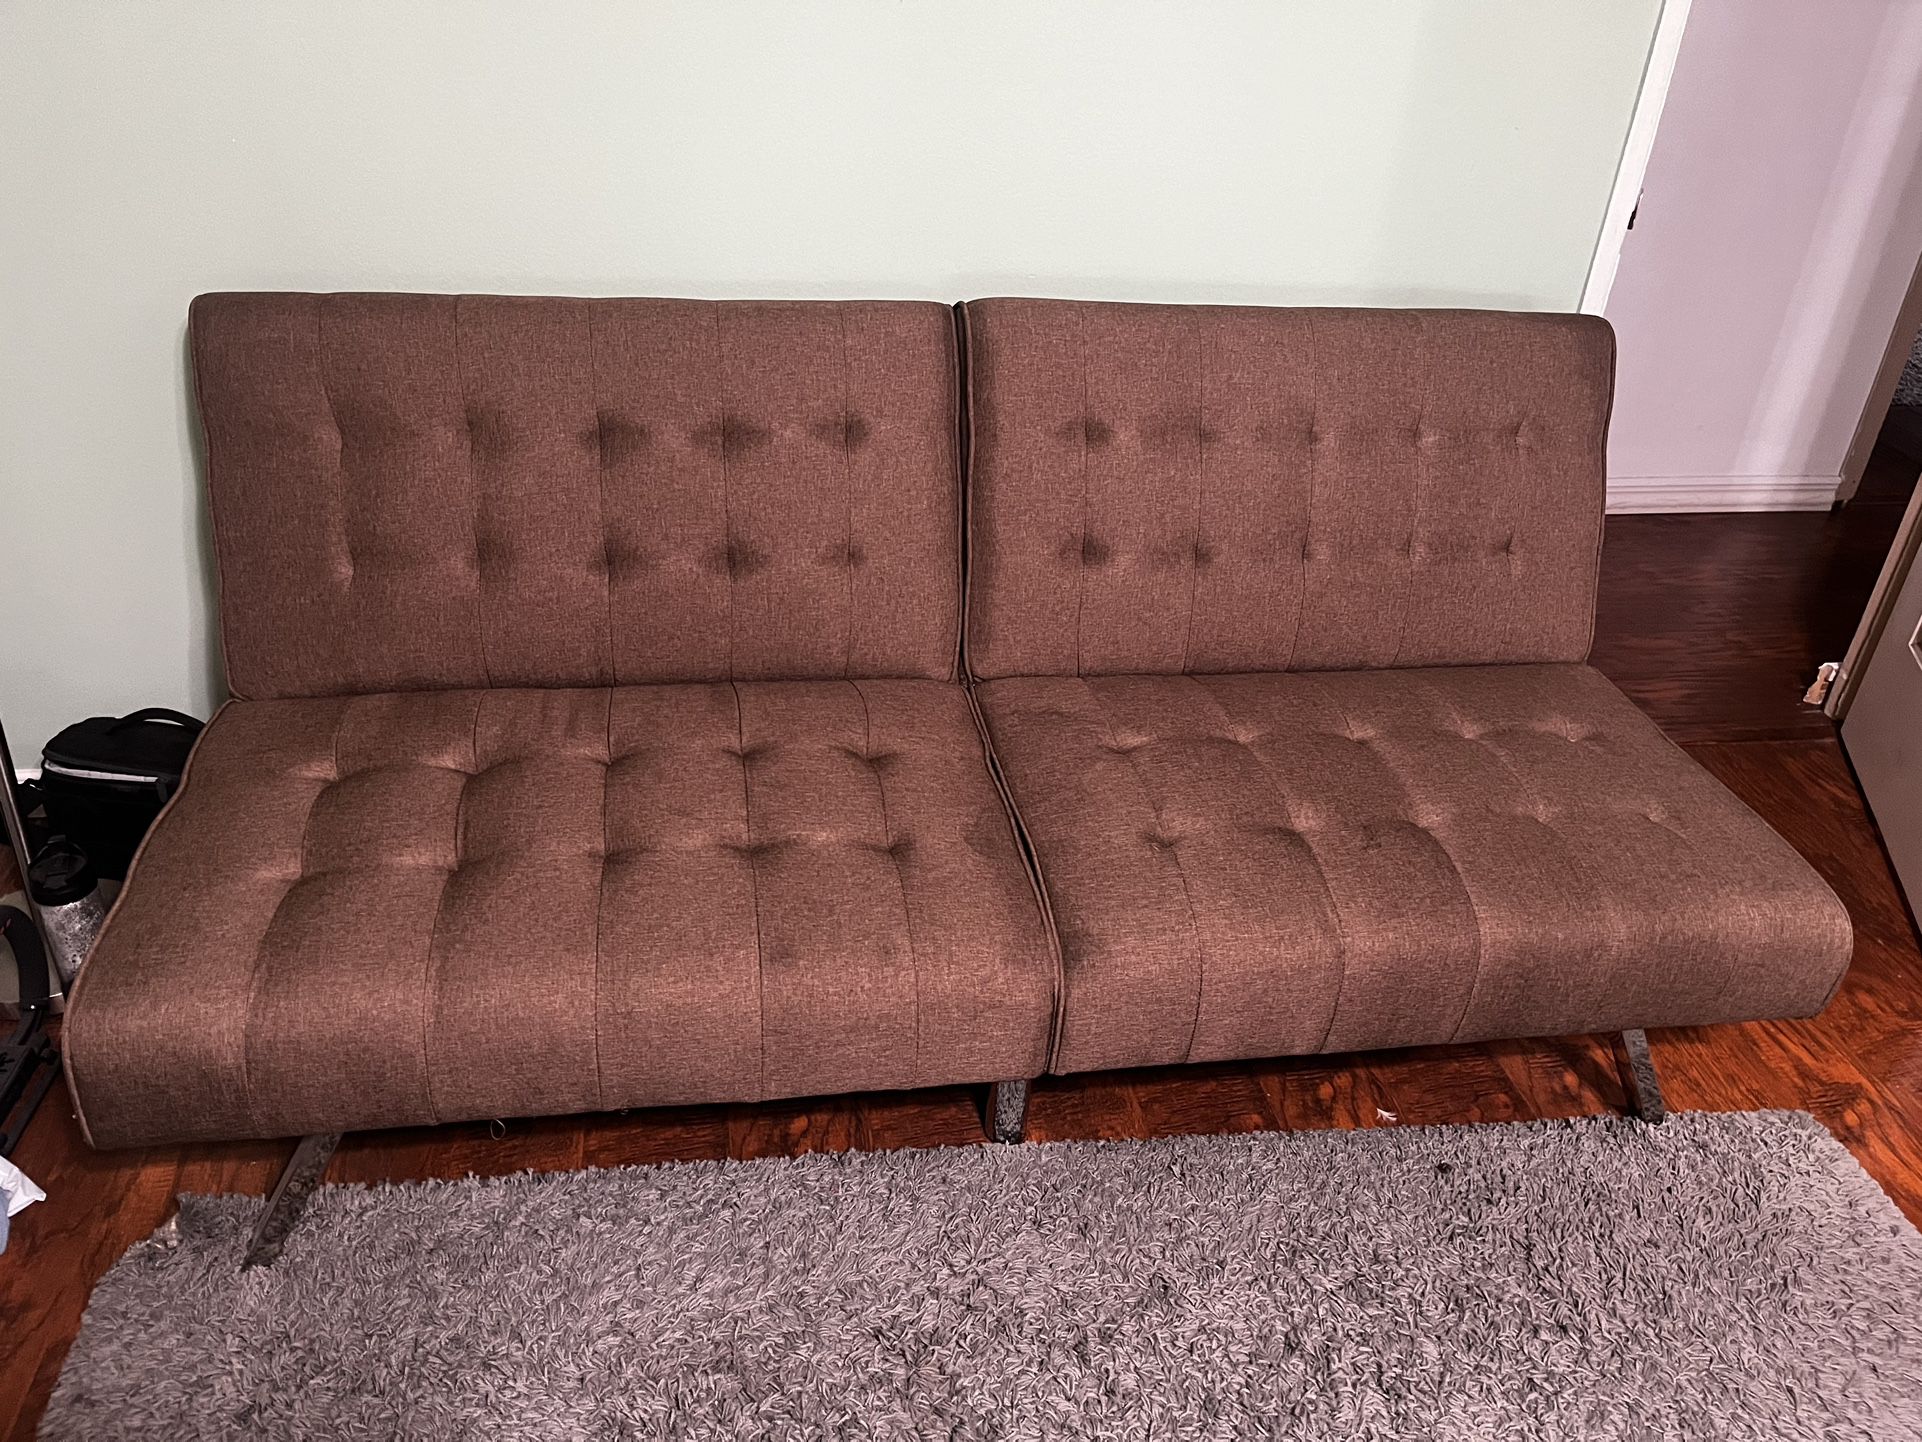 fold out futon couch/bed